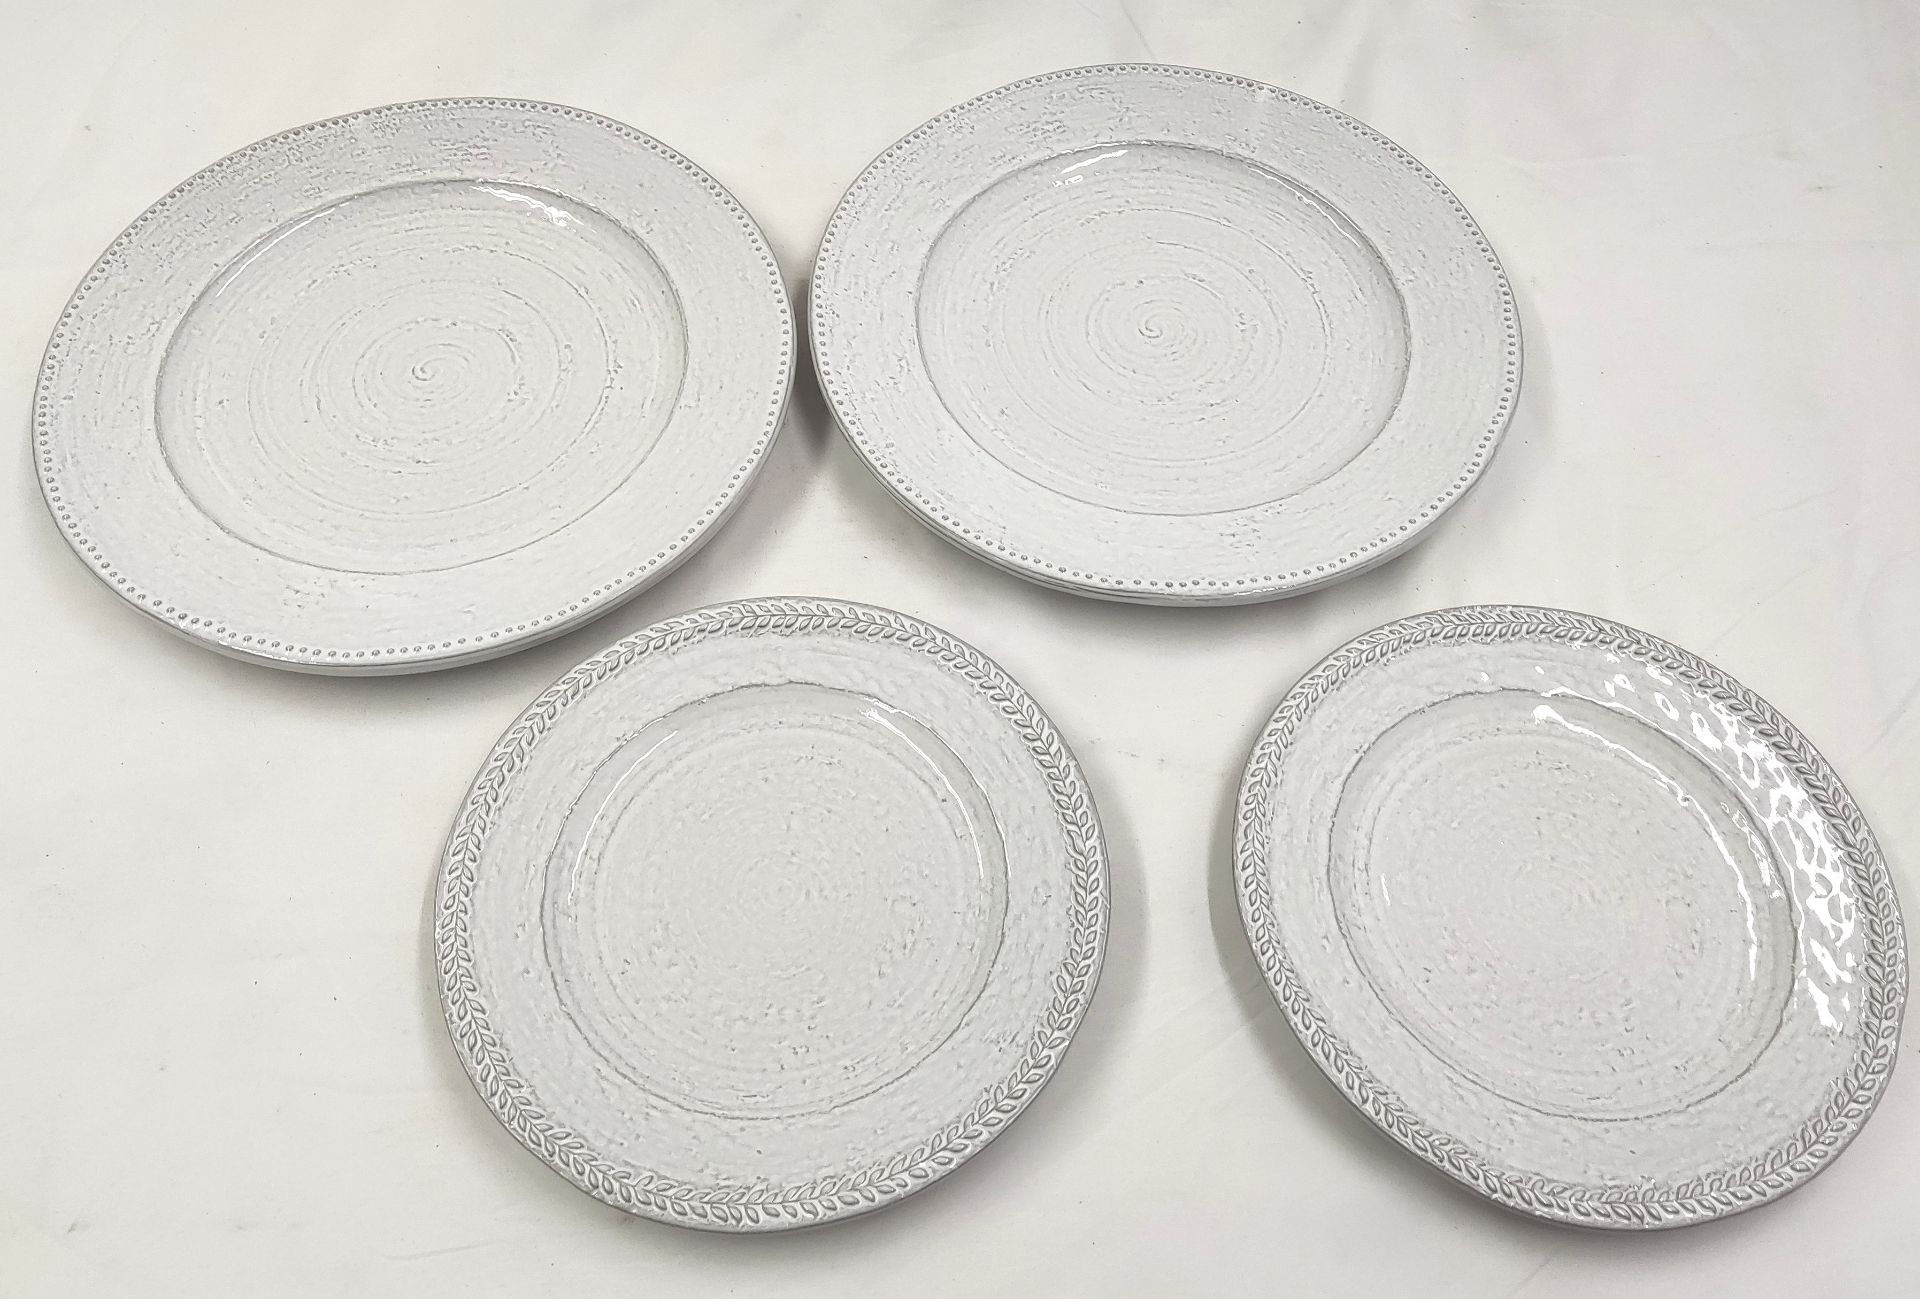 1 x SOHO HOME Set Of Hillcrest Plates - 2 X Side Plate And 2 X Dinner Plate - New/Unused - RRP £ - Image 12 of 12